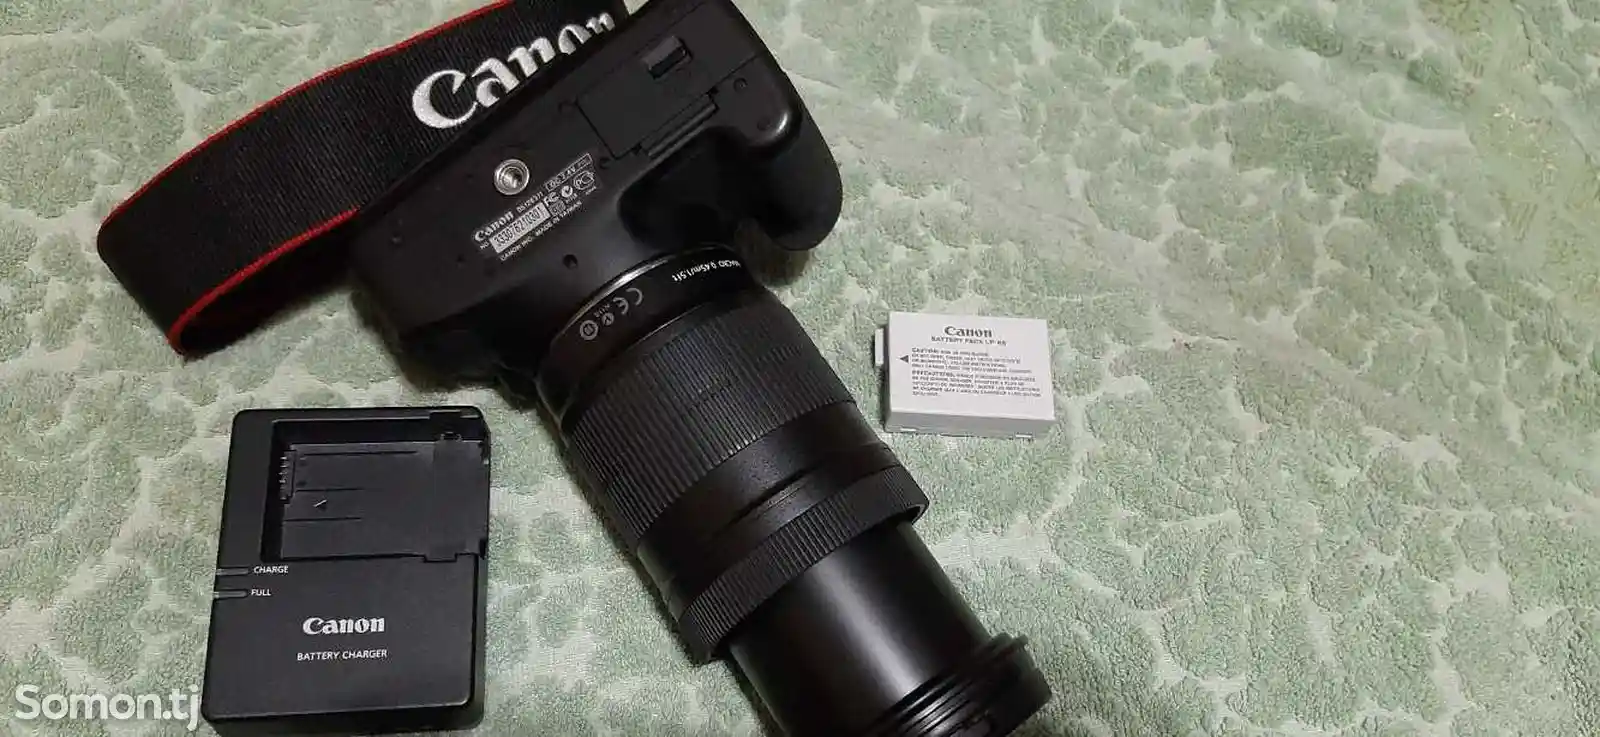 Canon Ds126311-1